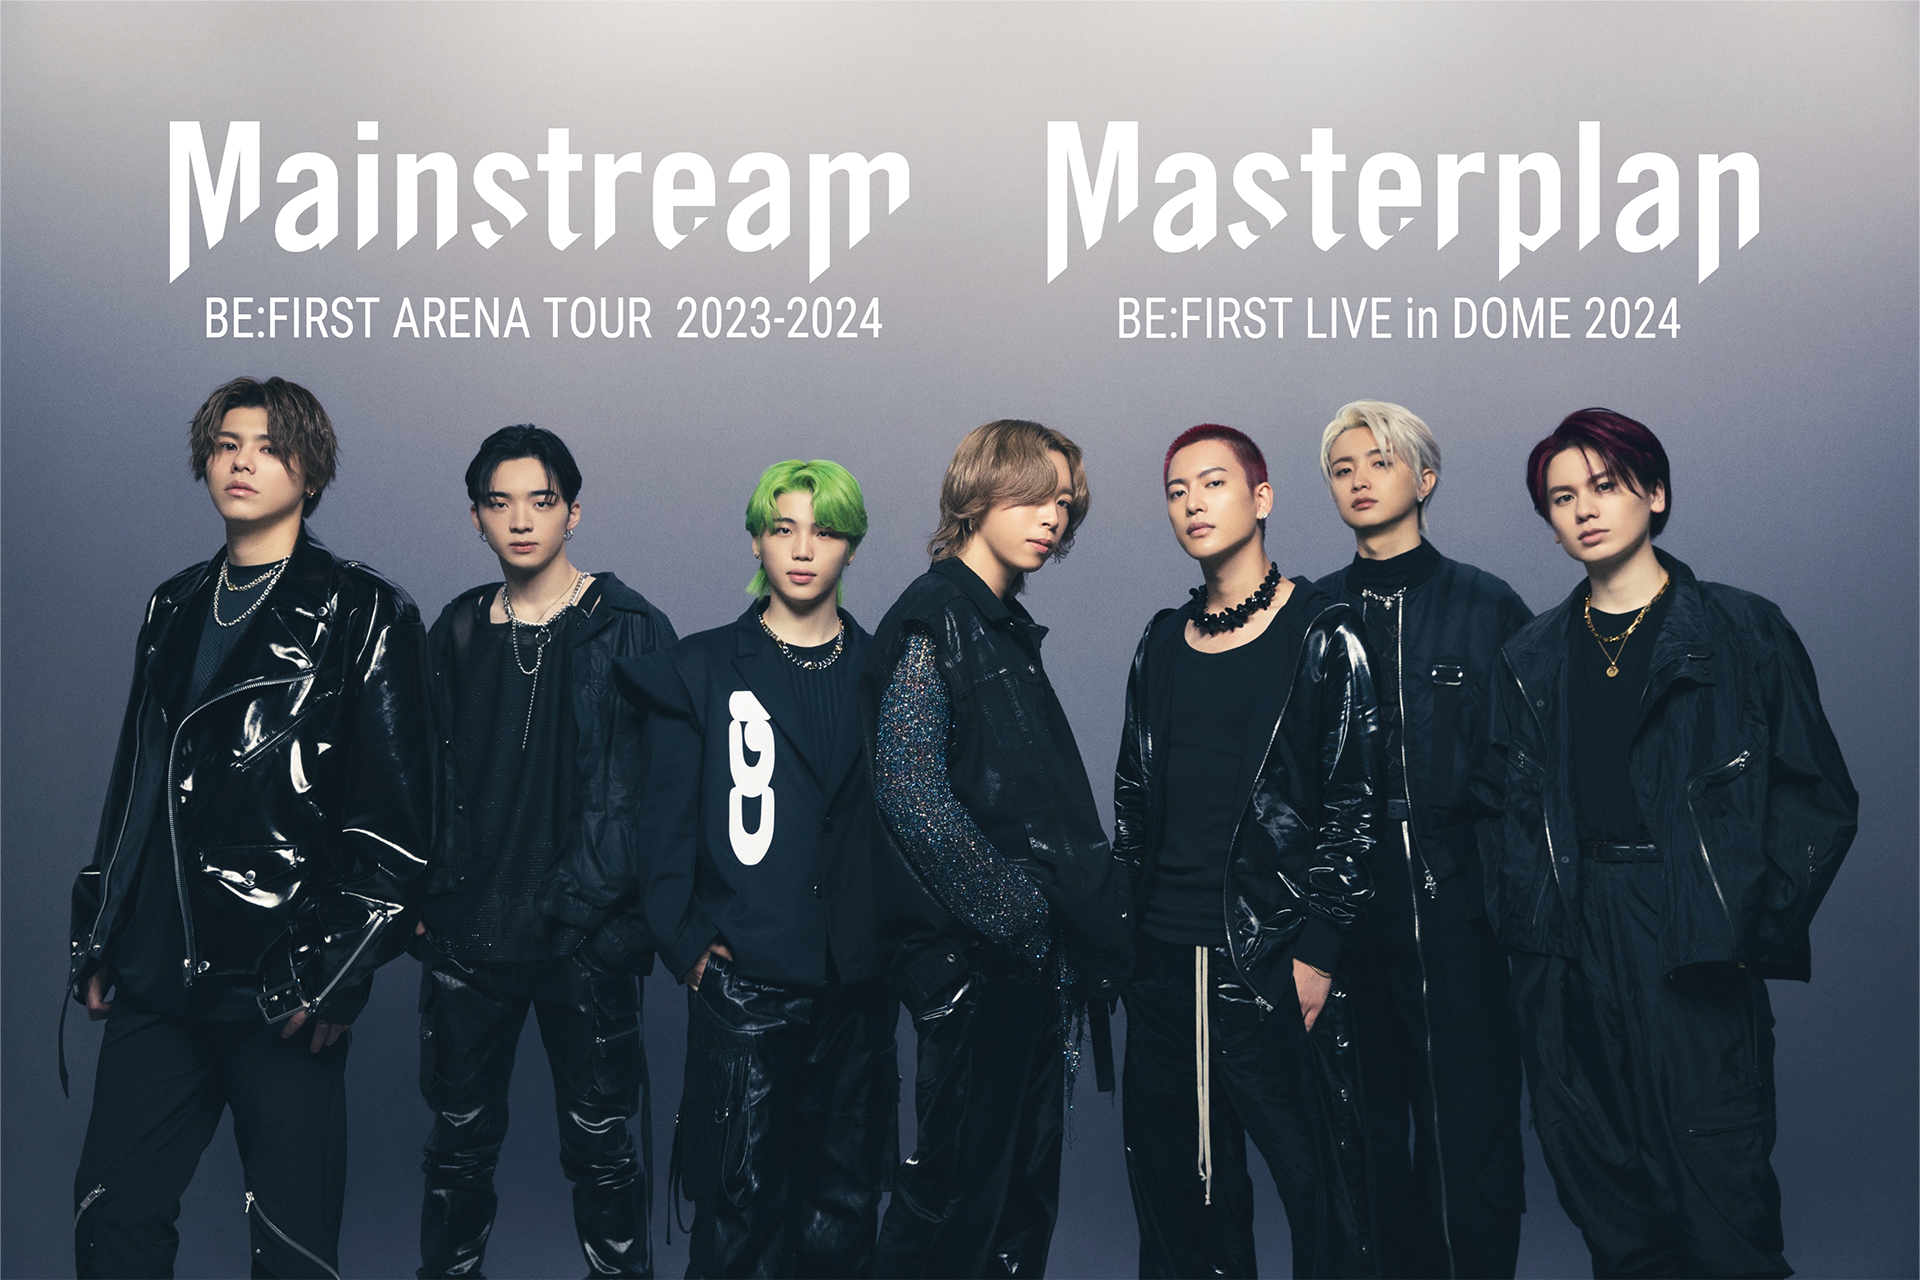 BE:FIRST LIVE in DOME 2024 “Mainstream - Masterplan”